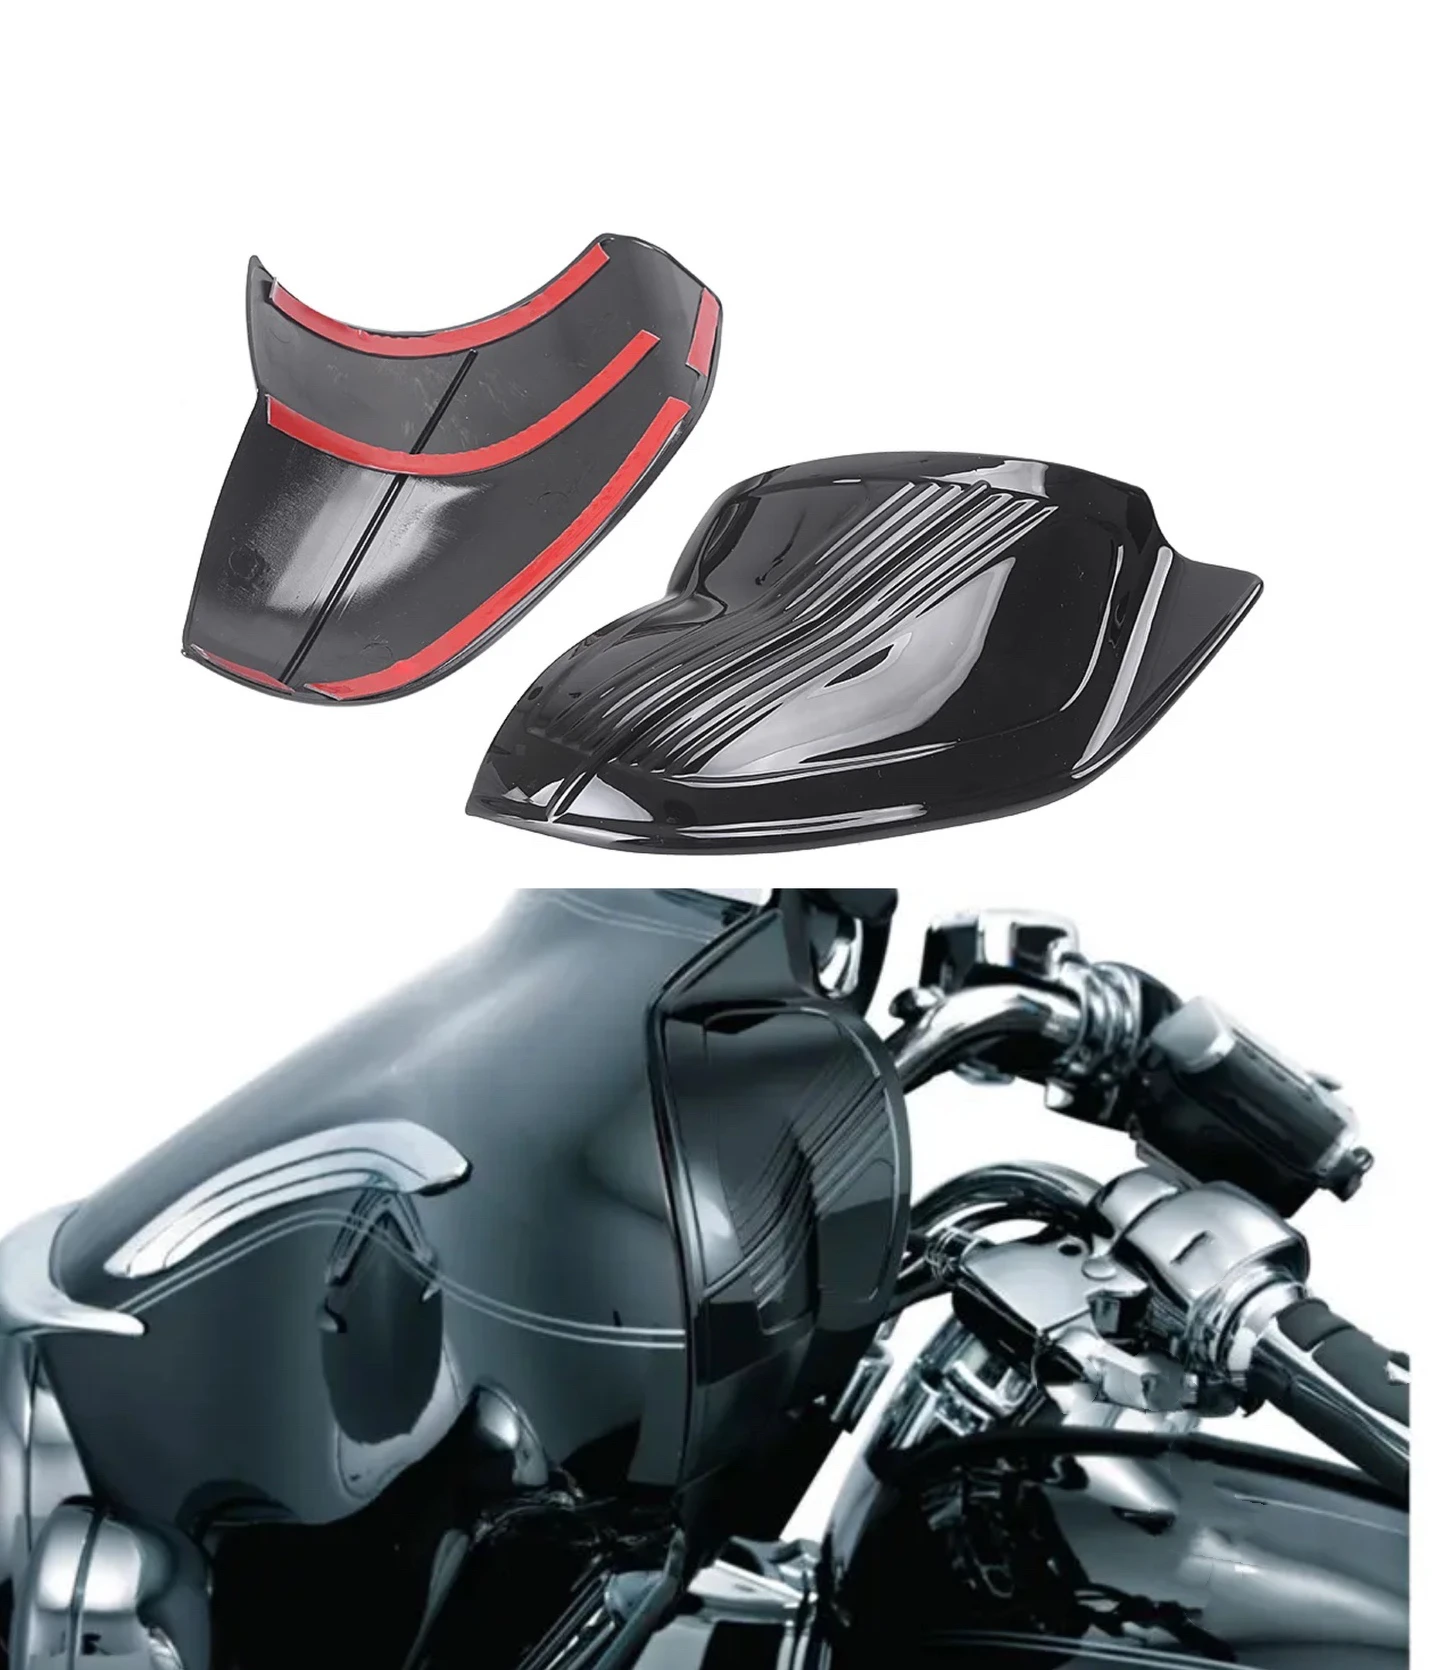 

ABS Plastic Inner Fairing Covers for Harley Davidson HD Touring Electra Glide Ultra Classic Standard Motorbike Accessories